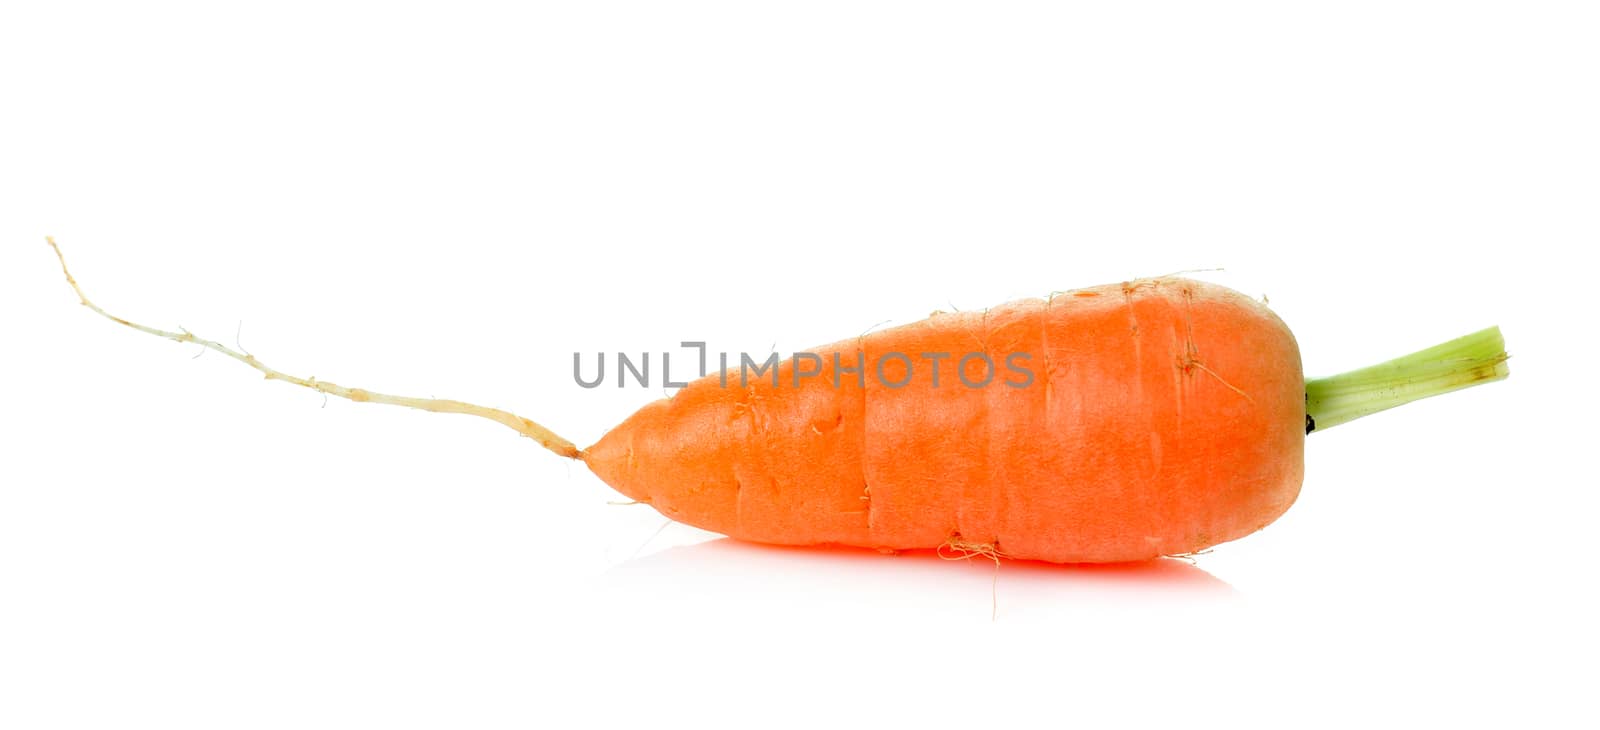 carrot isolated on white background by sommai